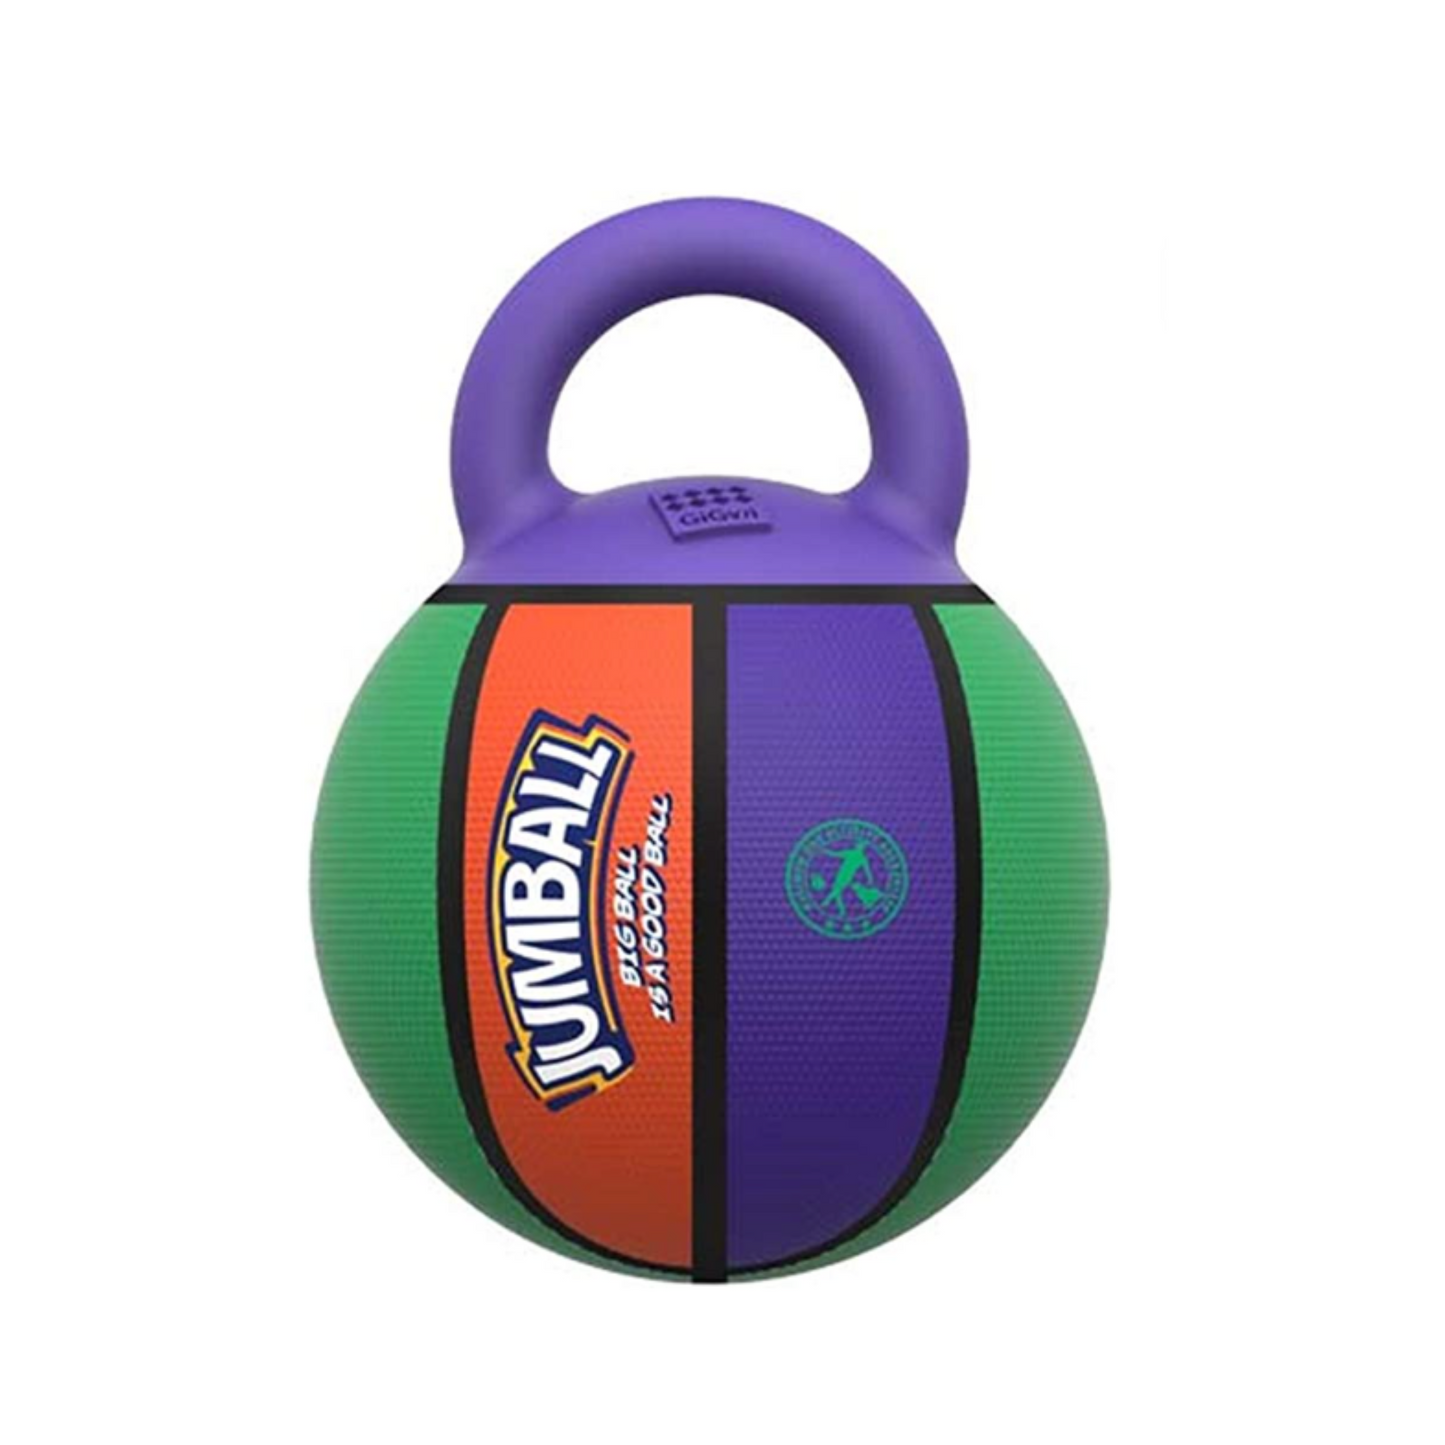 Gigwi Jumball Basketball With Rubber Handle Multi Colour Small & Large